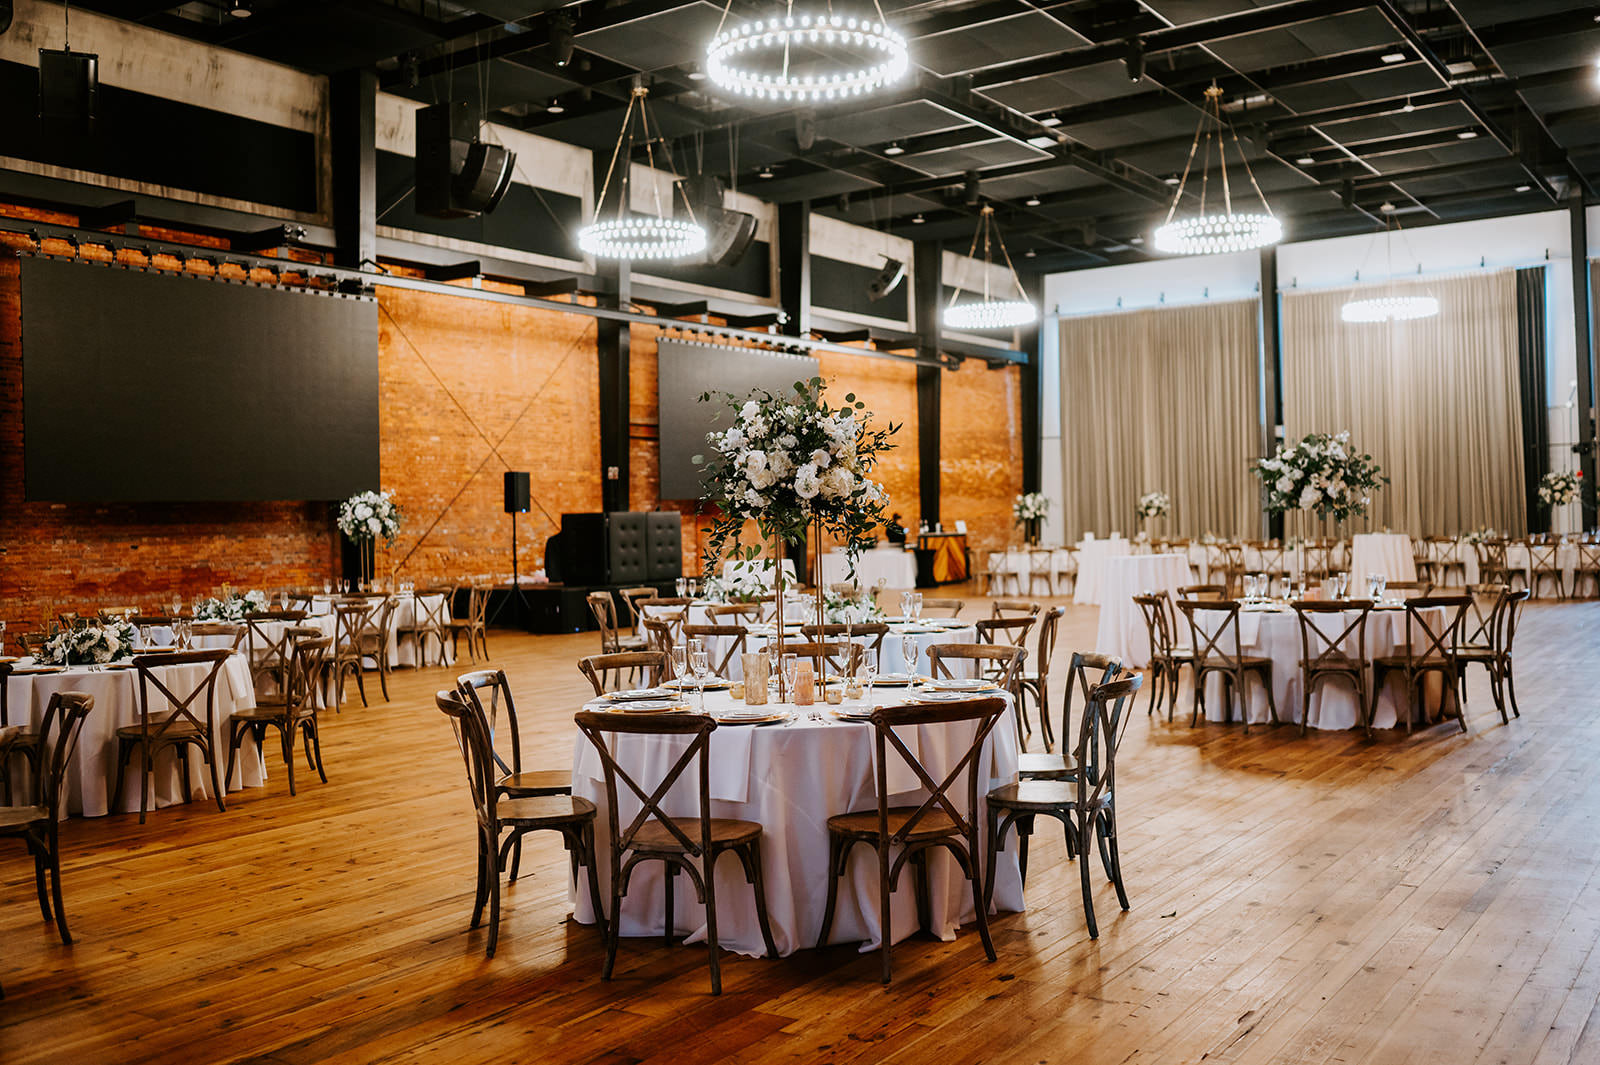 Classic Wedding Reception Table Setting Ideas | Gold Chargers | Roses, Snapdragons, Carnation Centerpiece Inspiration | Crossback Wooden Chair Seating | Tampa Heights Armature Works